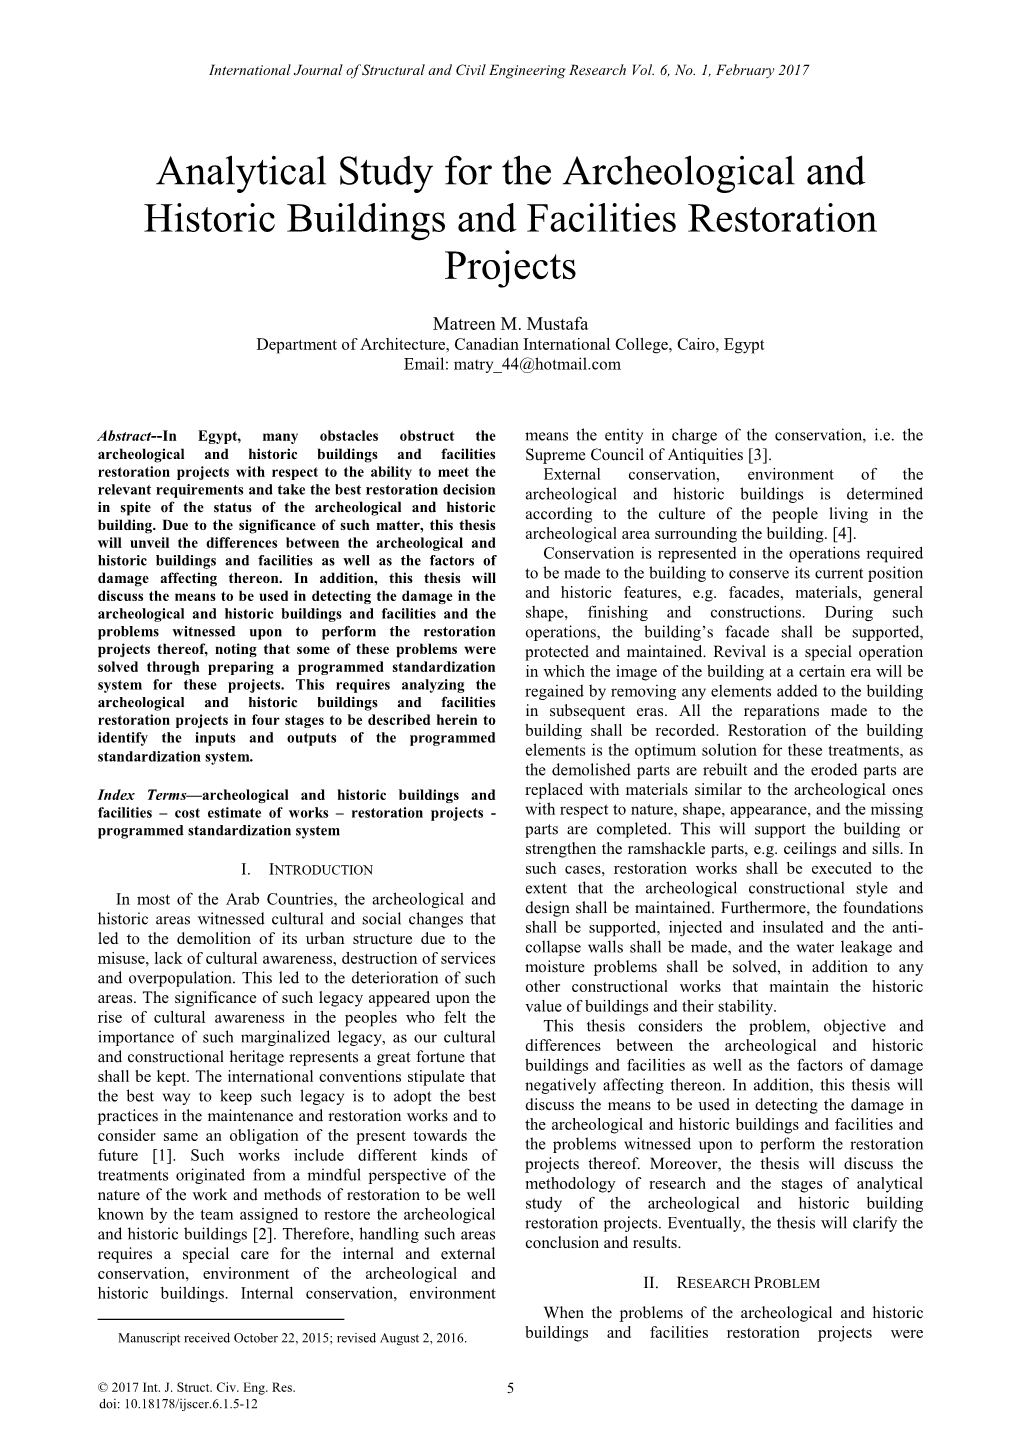 Analytical Study for the Archeological and Historic Buildings and Facilities Restoration Projects